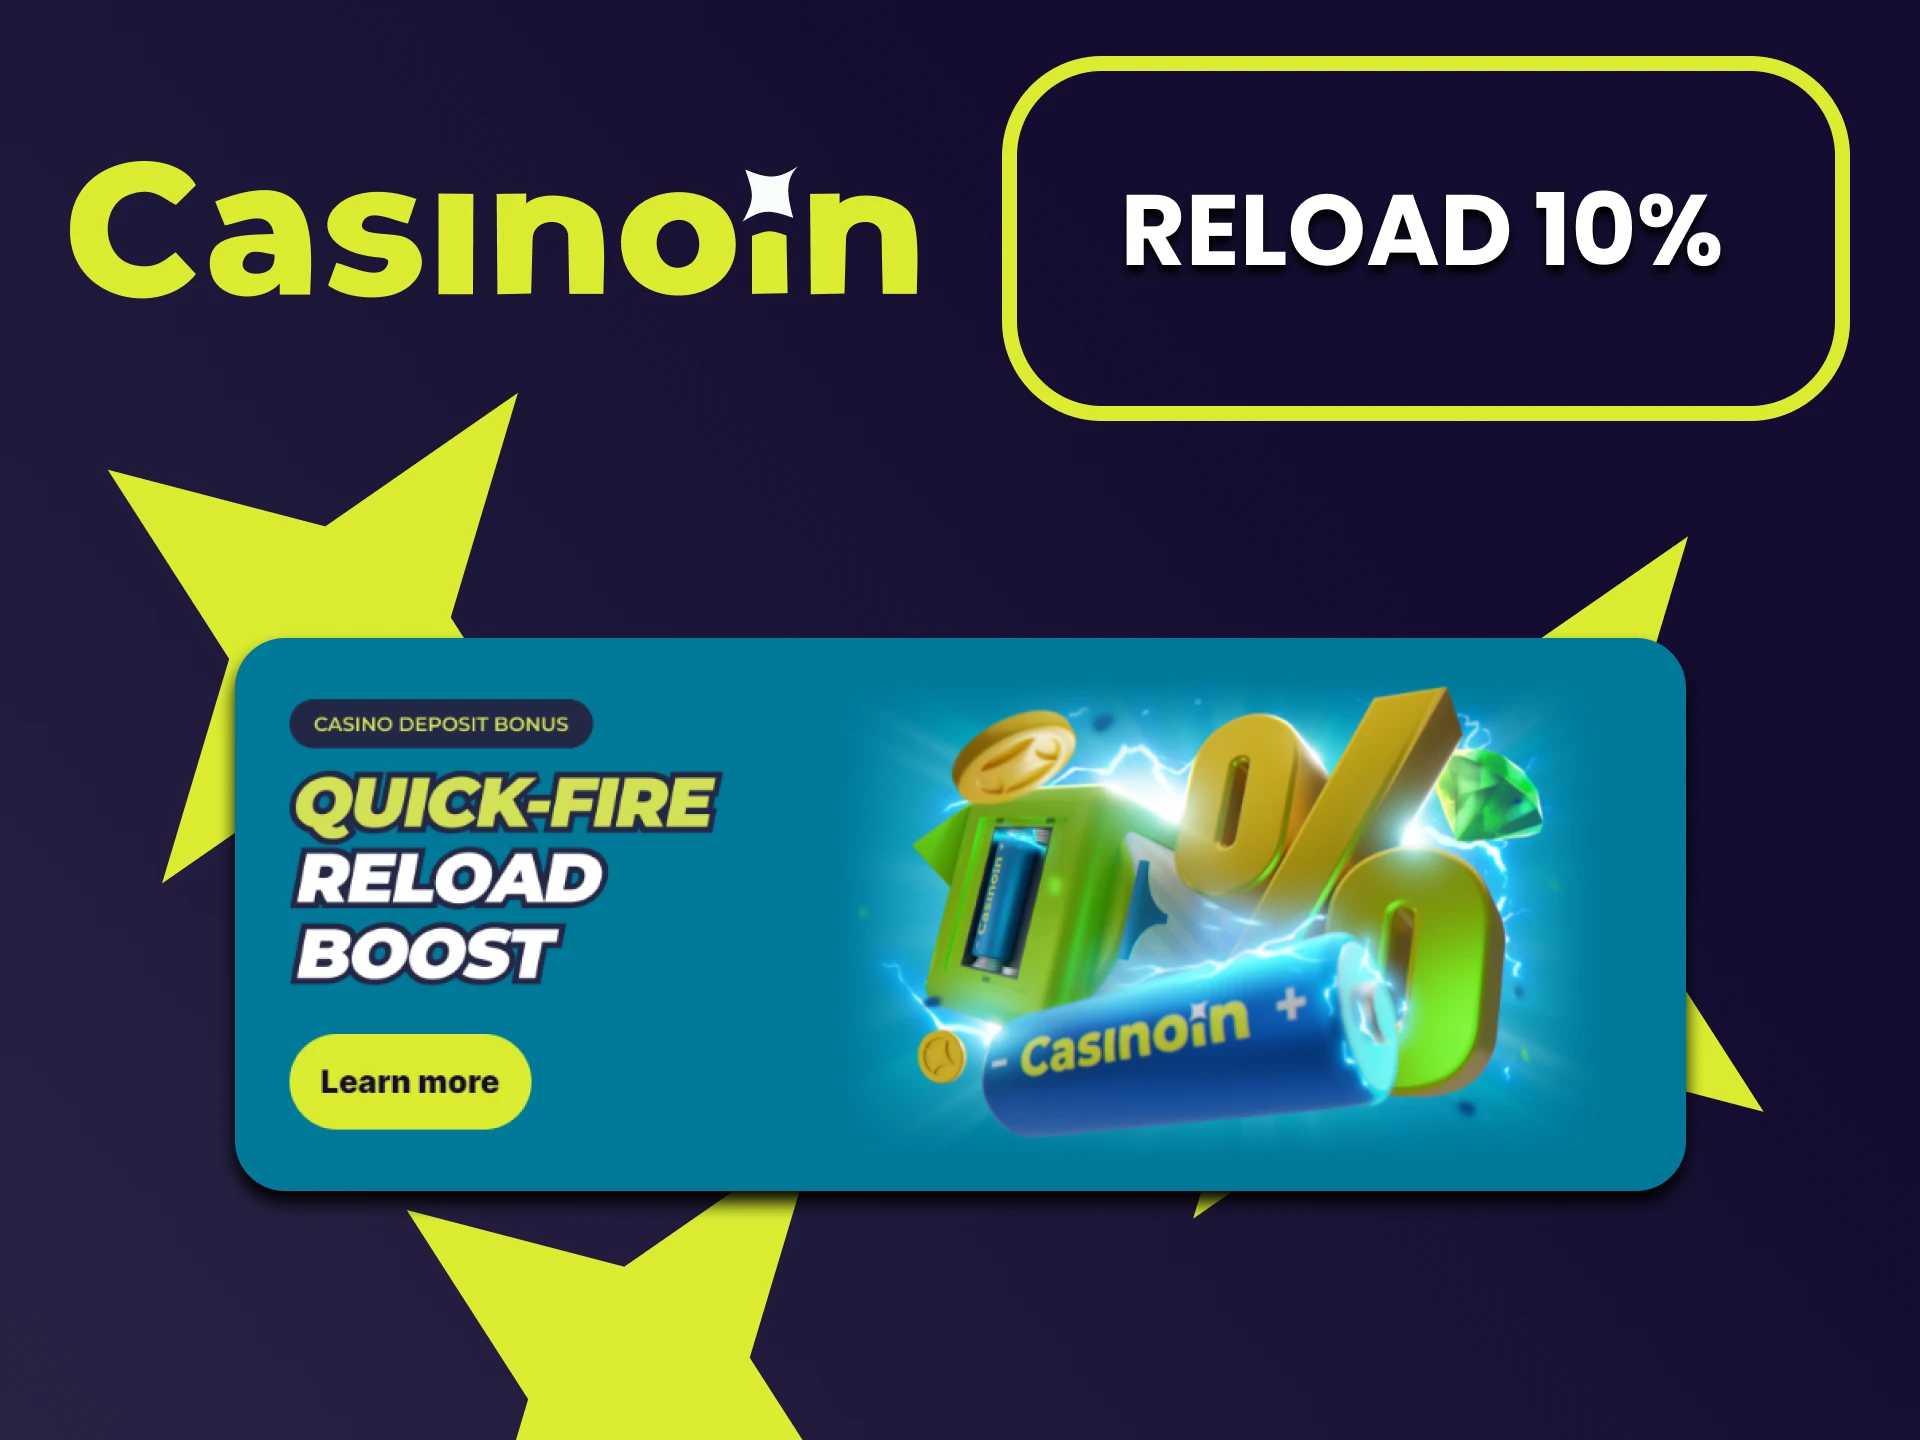 Receive a 10% Reload bonus from Casinoin.